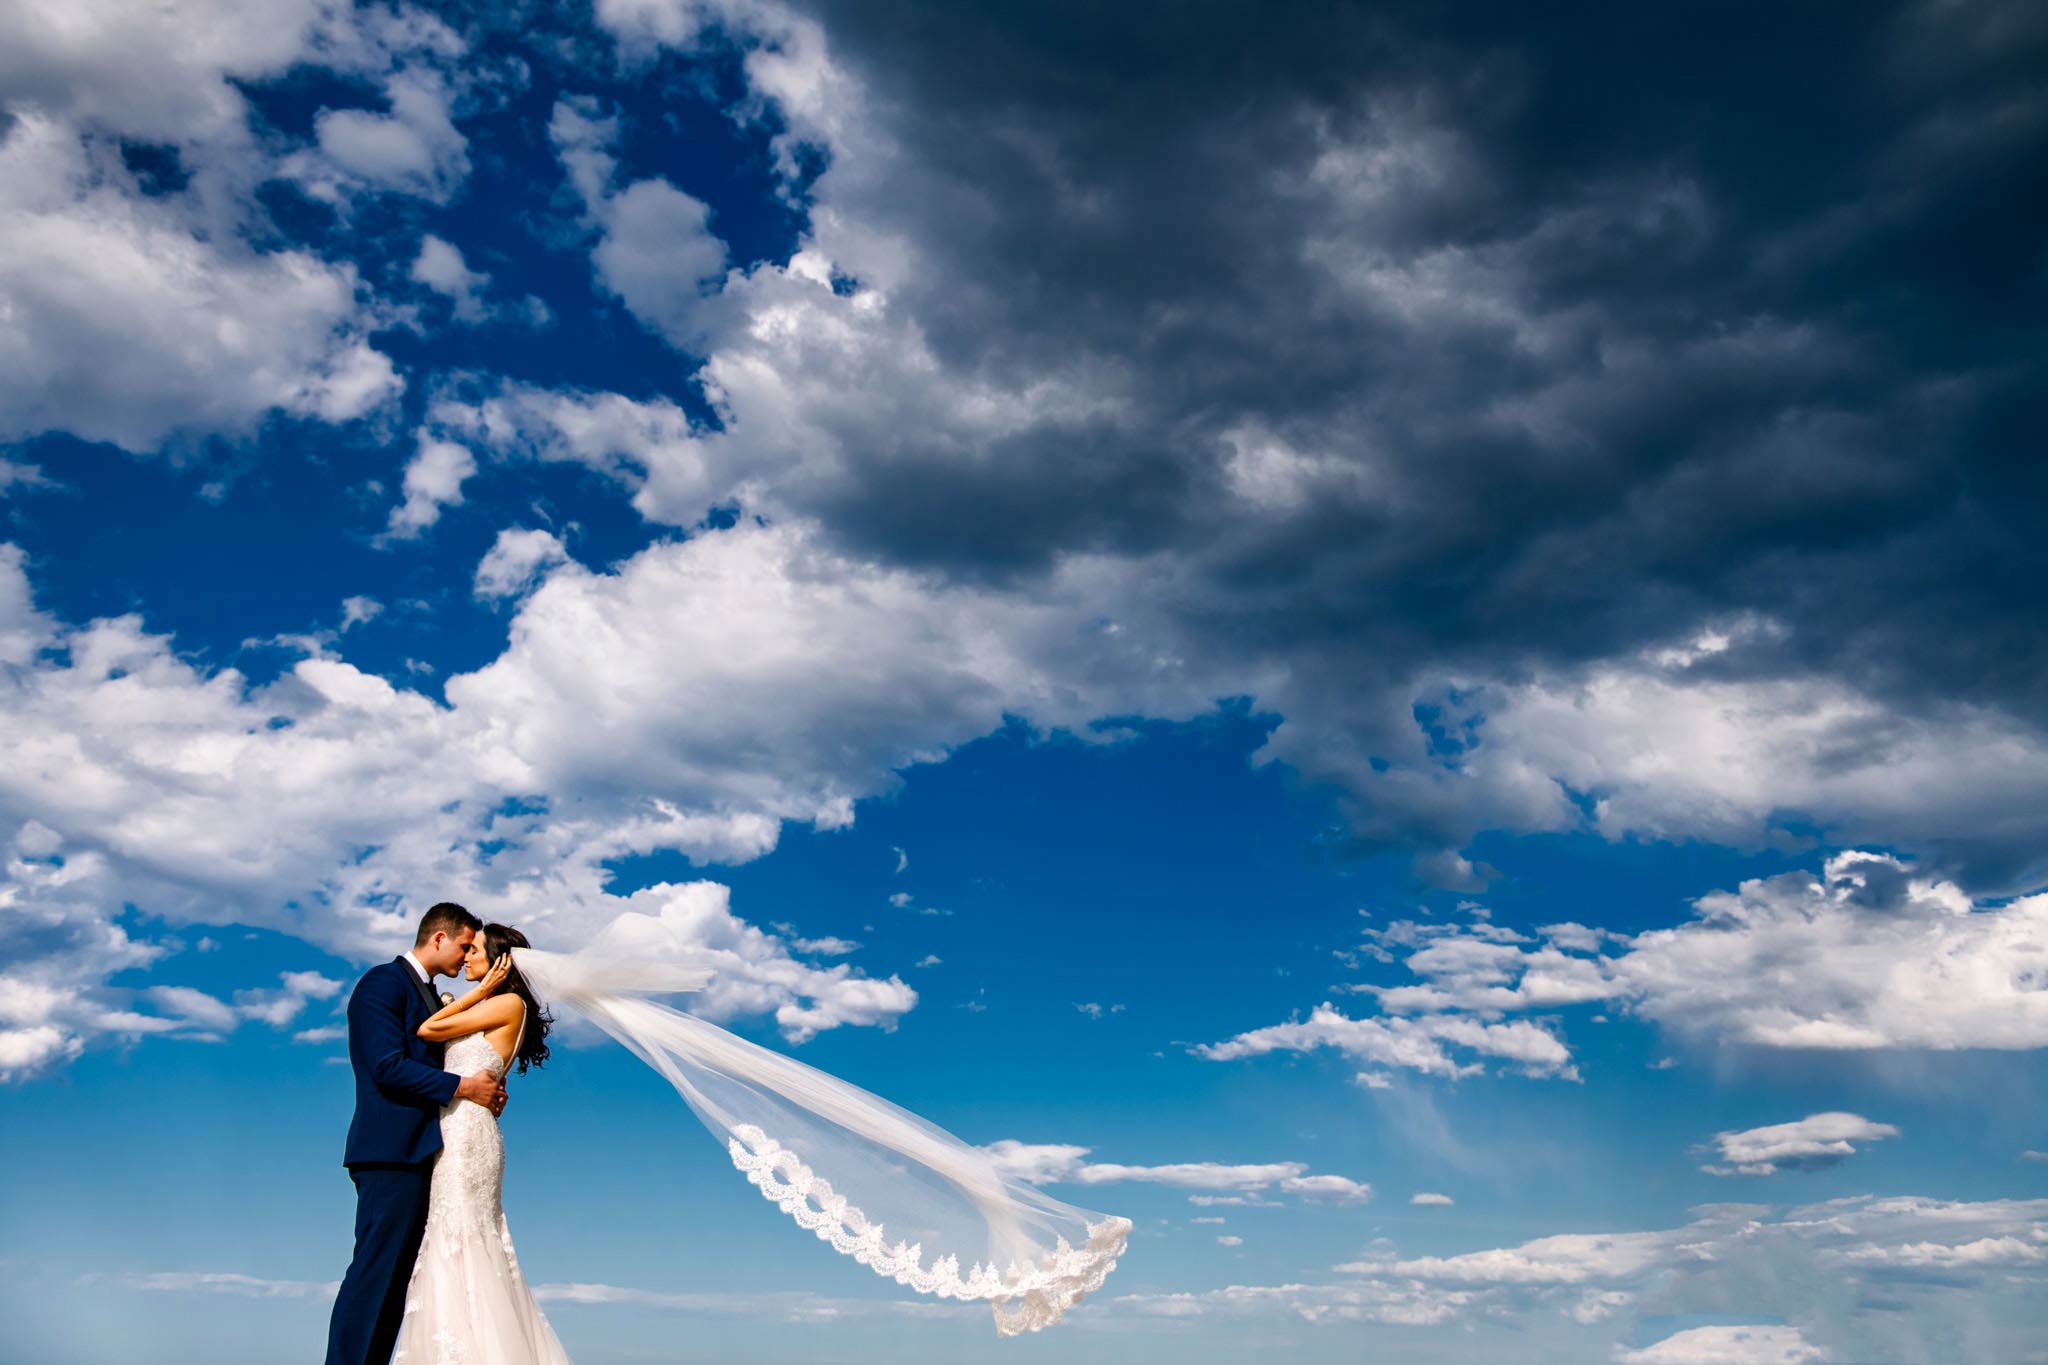 Newlyweds embrace with view of sky behind them as the bride's veil floats in the breeze